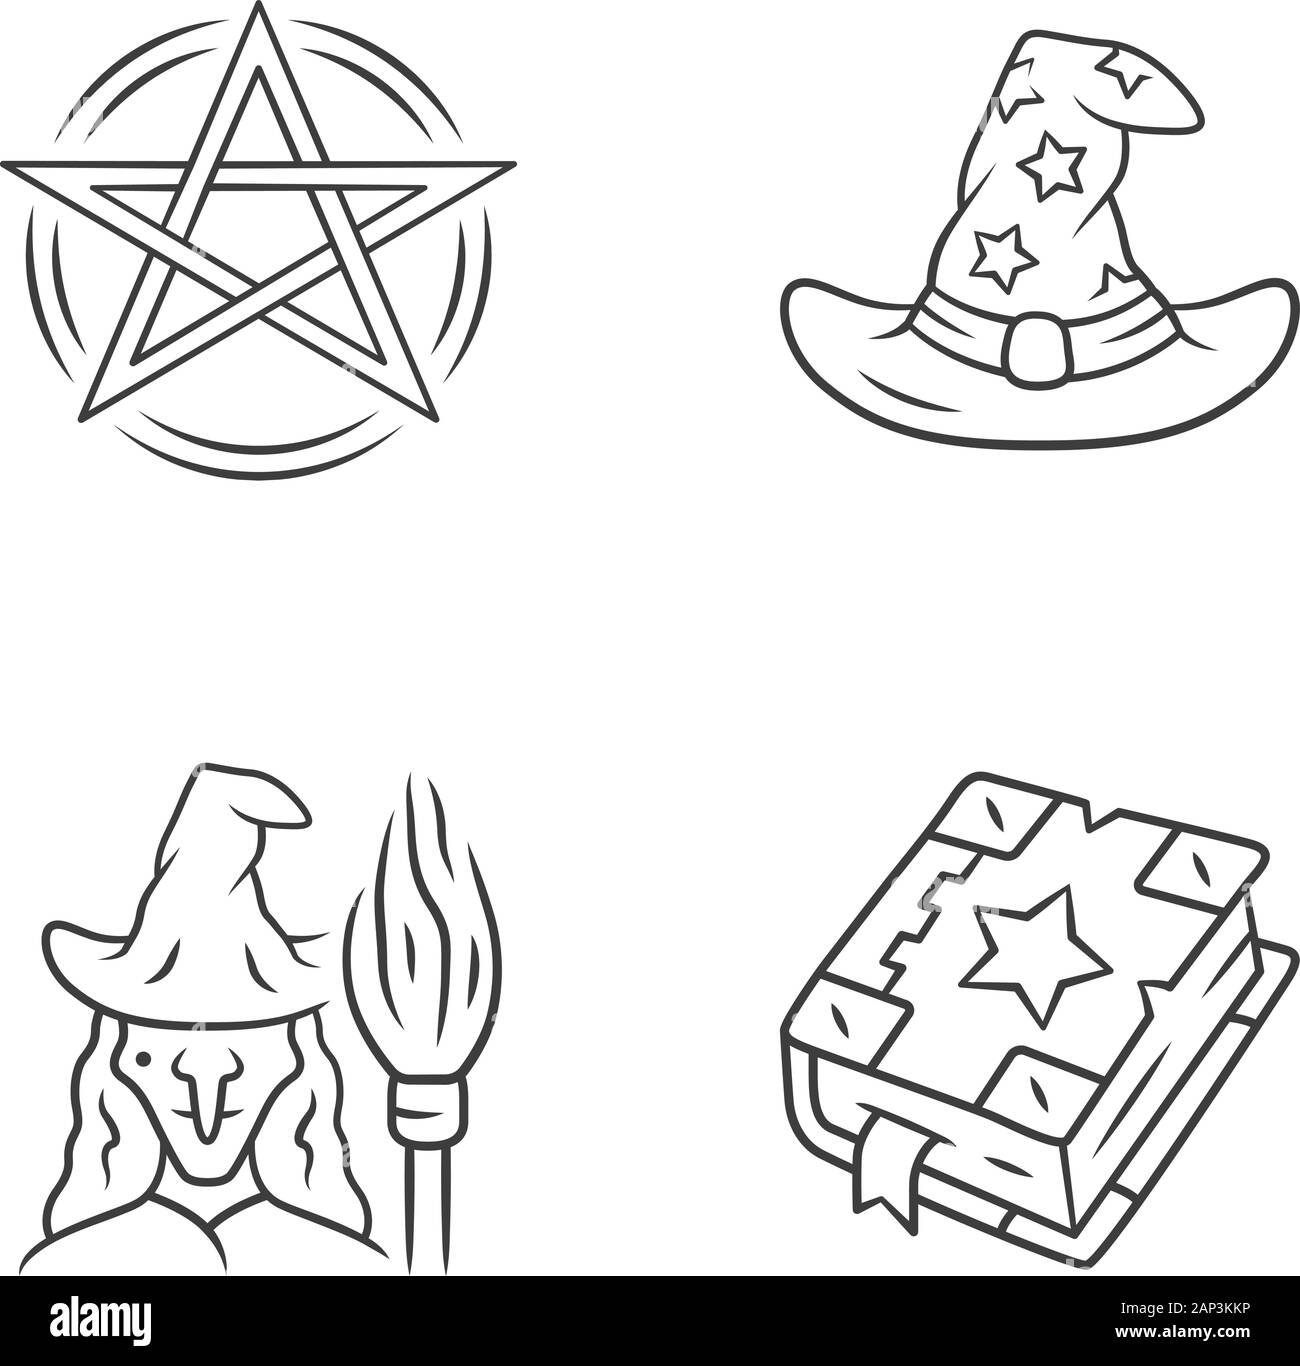 Magic linear icons set. Pentagram, wizard hat, witch, spell book. Witchcraft, occult ritual items. Mystery objects. Thin line contour symbols. Isolate Stock Vector